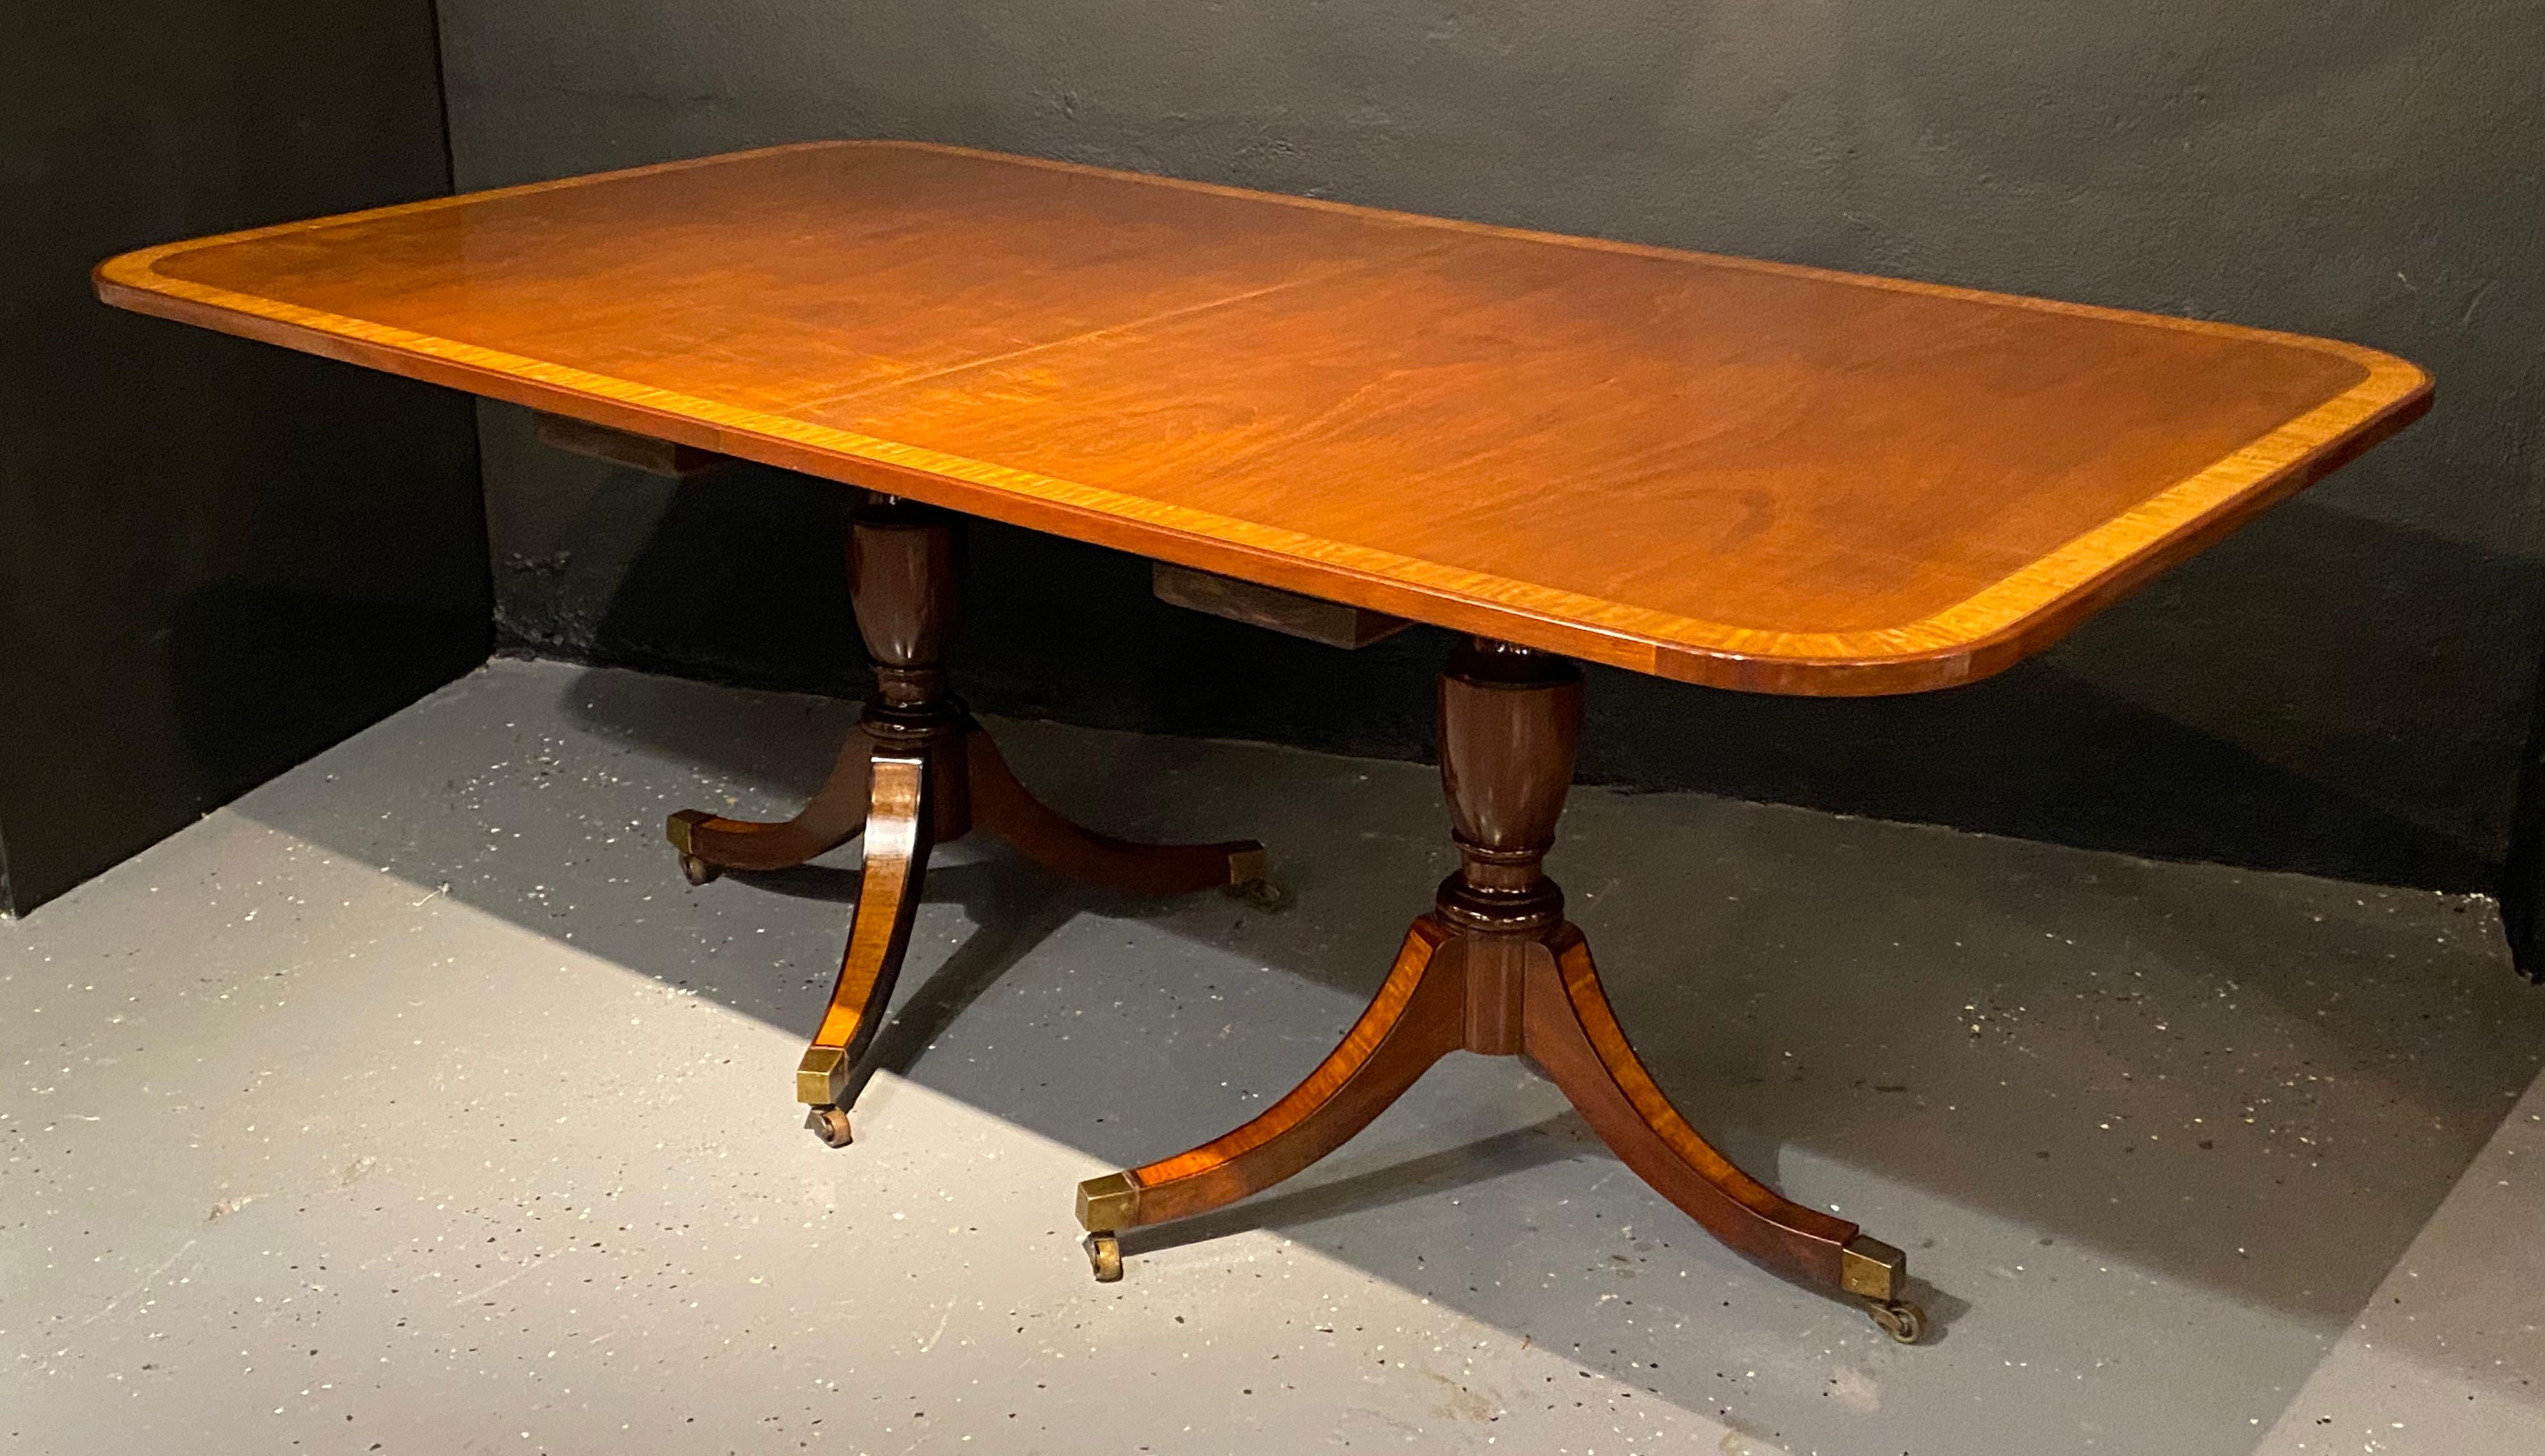 Georgian style double pedestal dining room table. Crotch mahogany and satinwood banded with a banded table base. Just in time for the holidays. This finely constructed and sturdy dining table is simply stunning depicting old world charm and formal